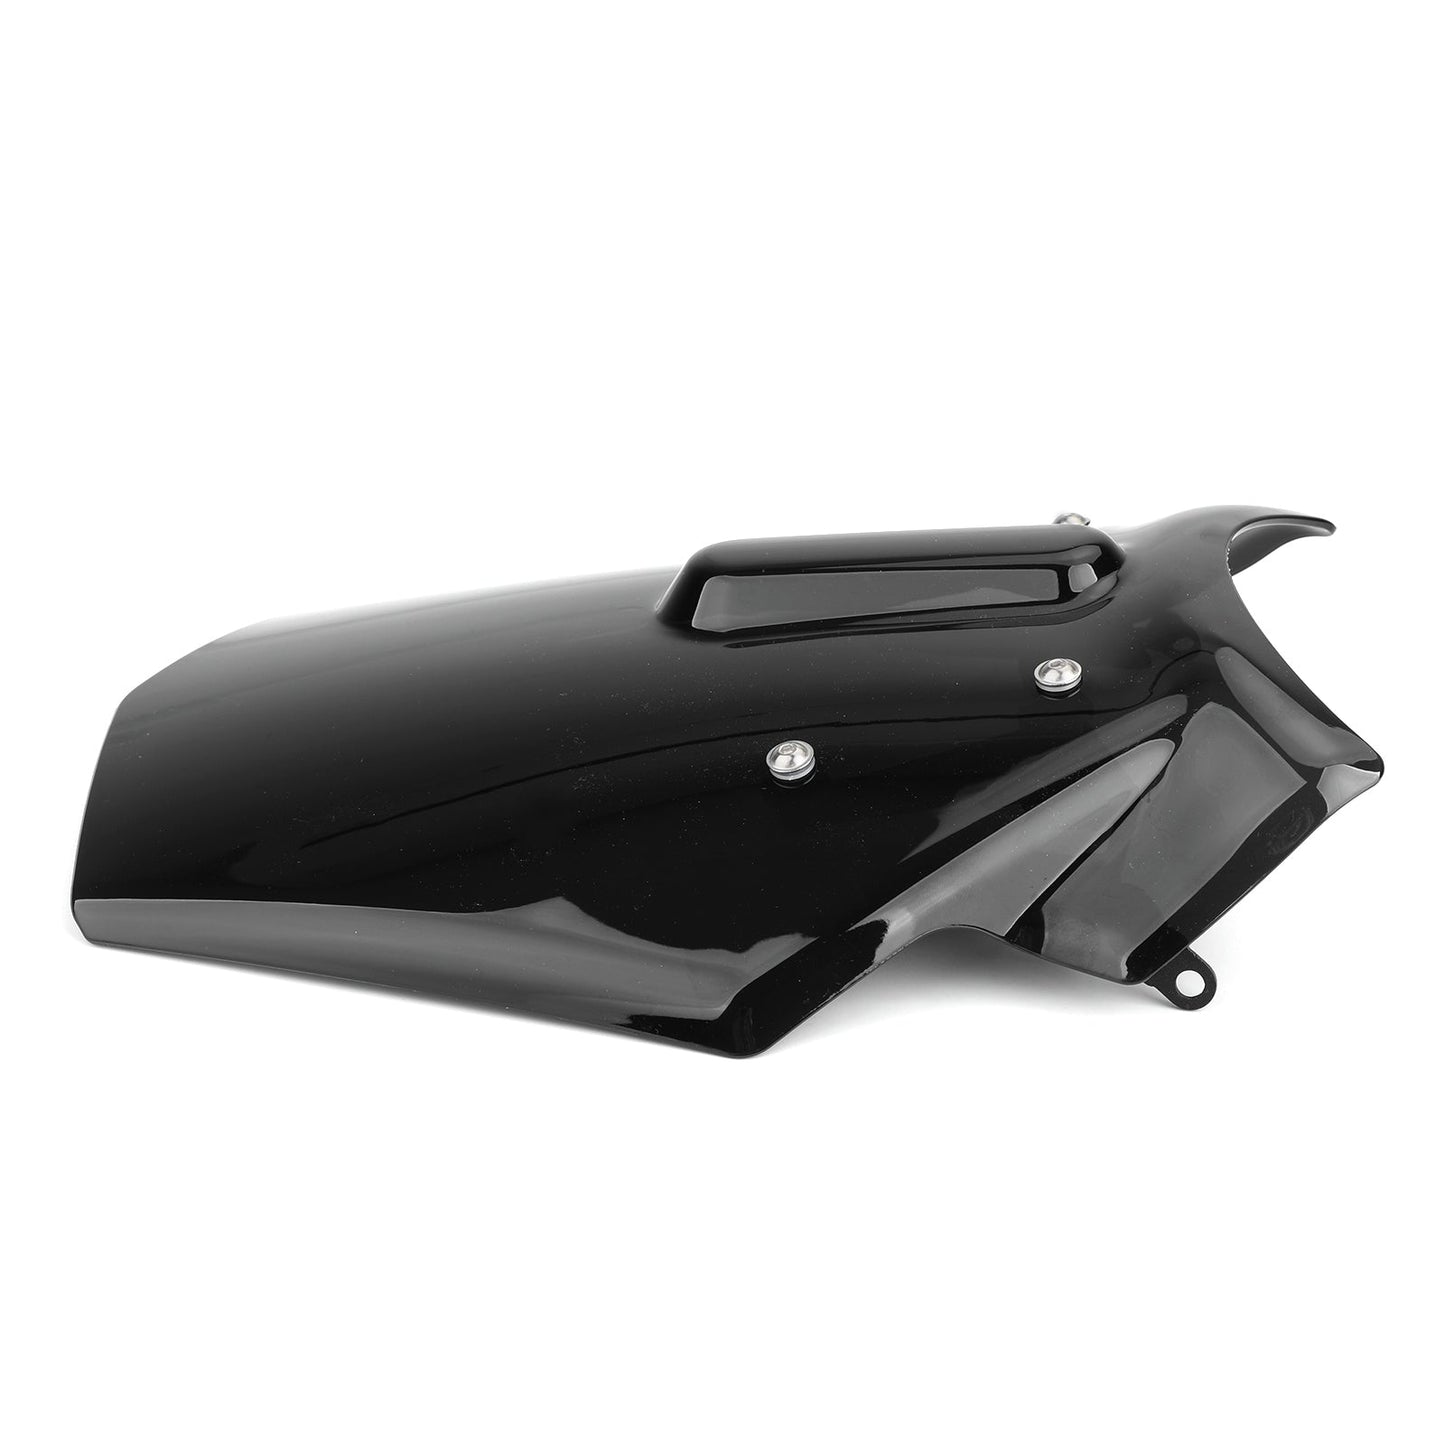 ABS Plastic Motorcycle Windshield Windscreen for Honda CB125R CB300R 2018-2019